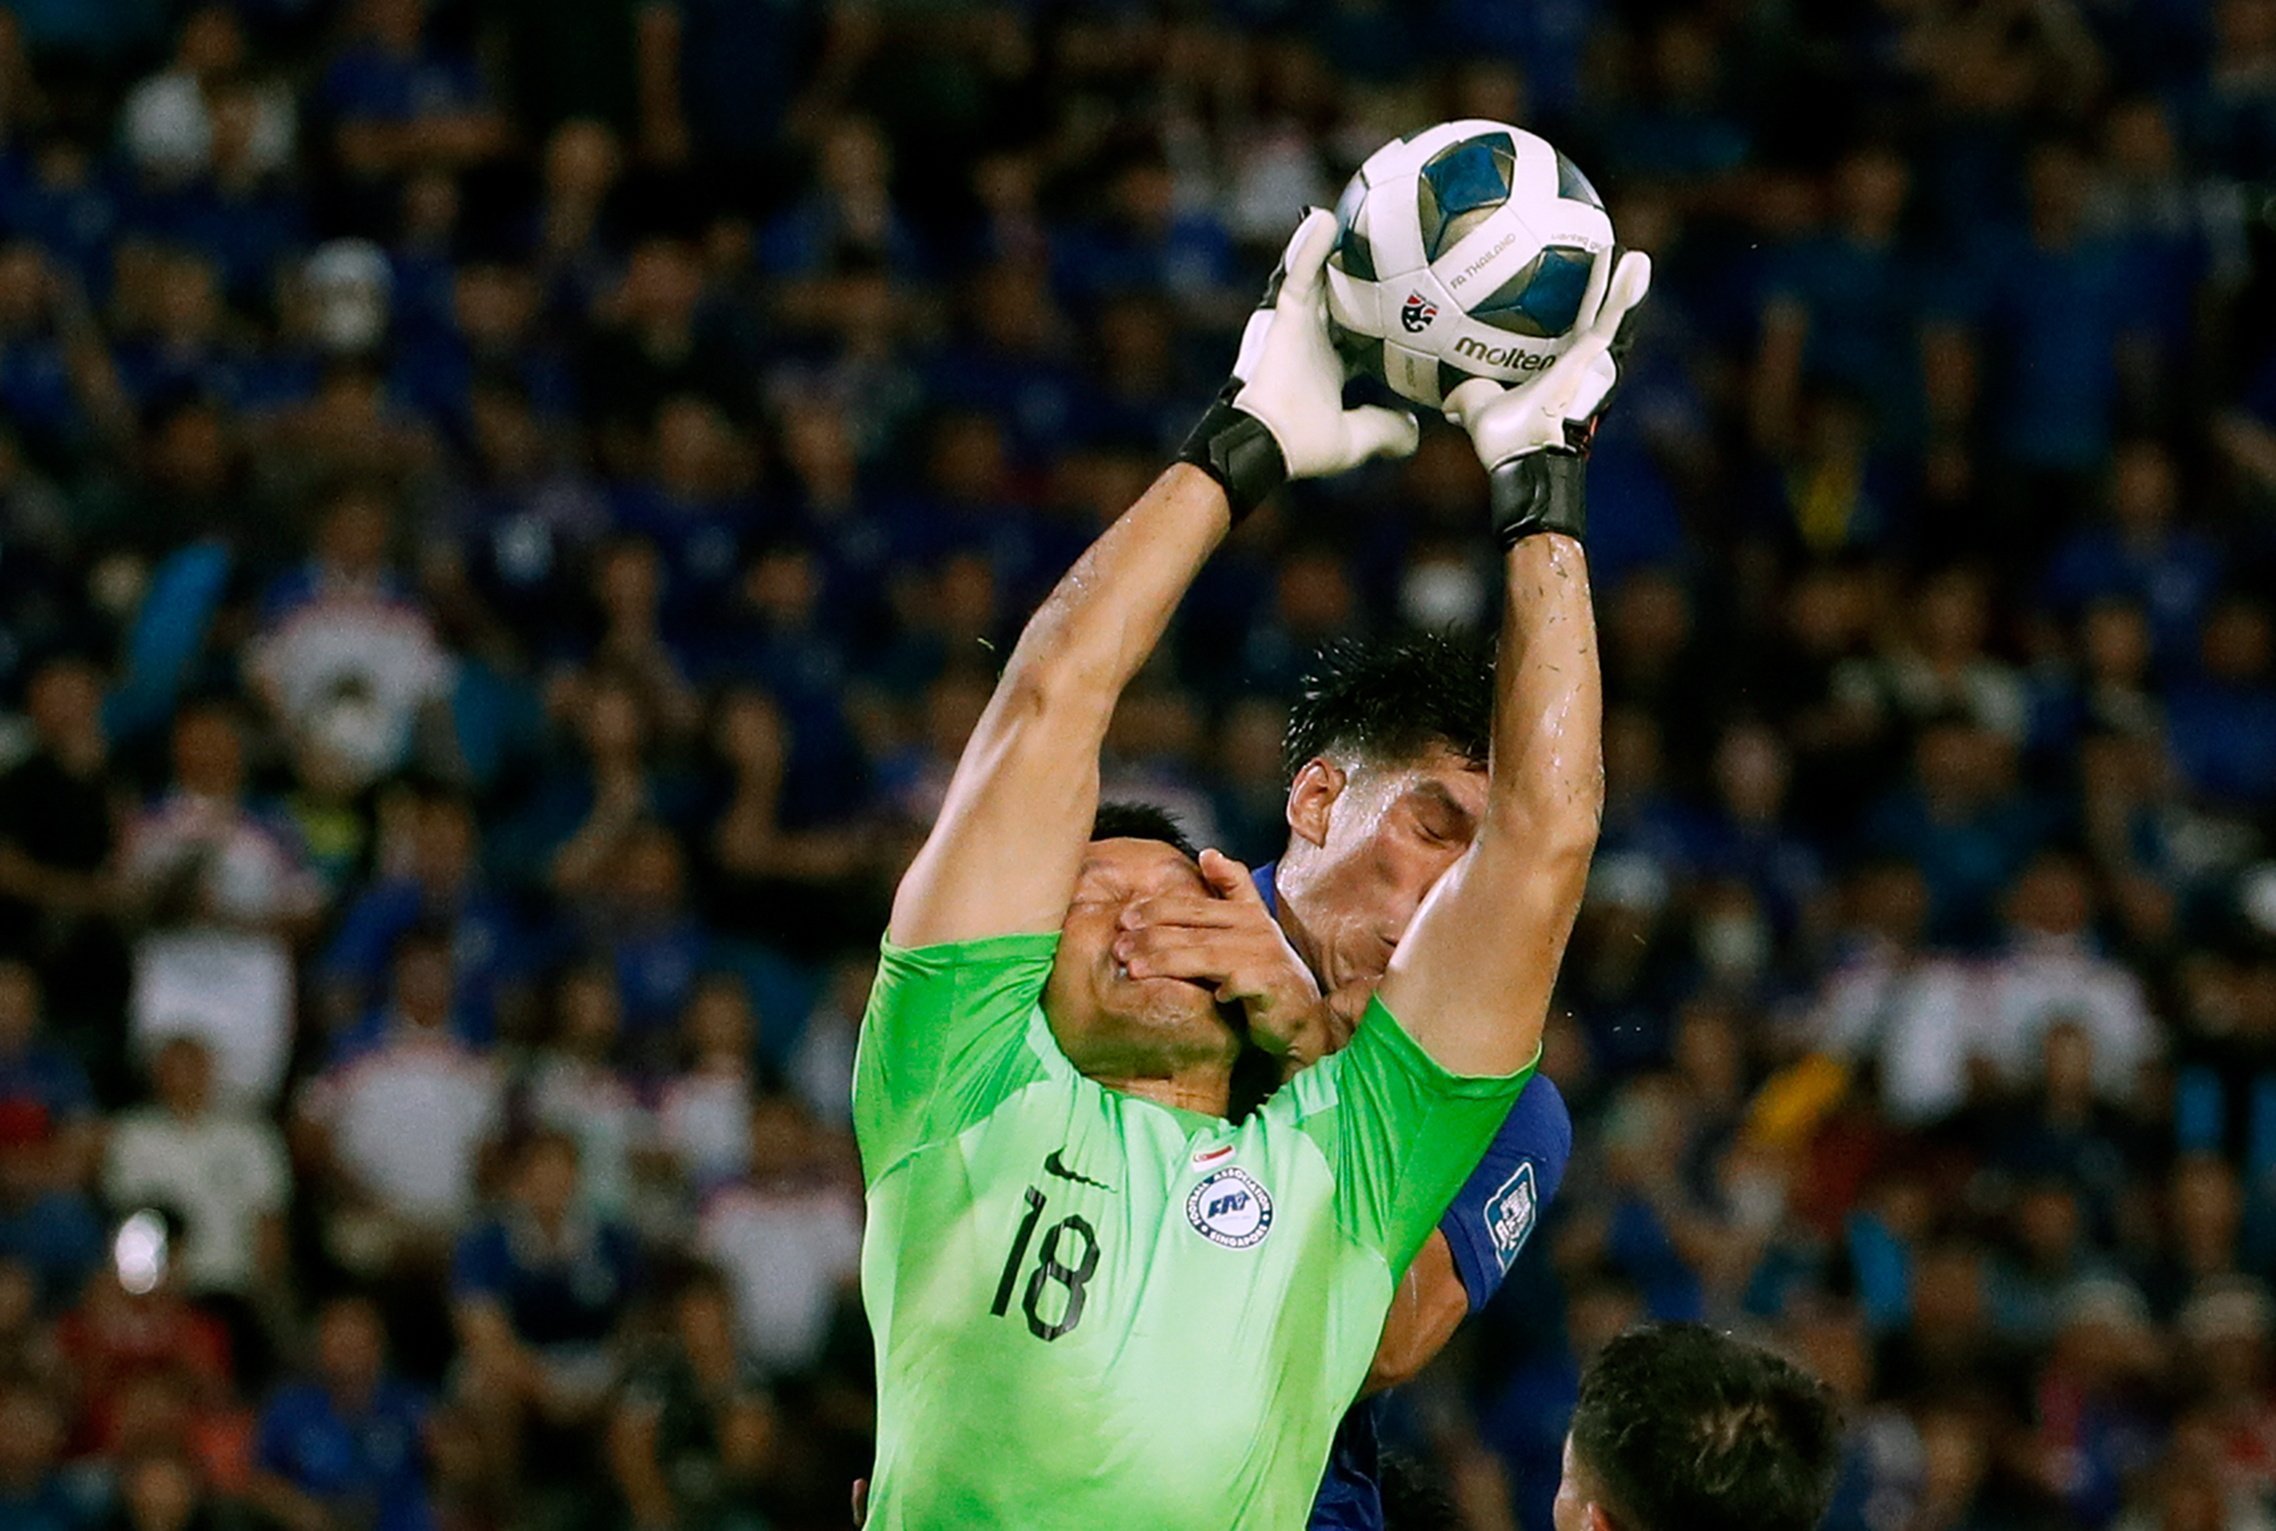 Singapore goalkeeper Hassan Sunny has been praised for his heroic performance against Thailand by Chinese football fans. Photo: EPA